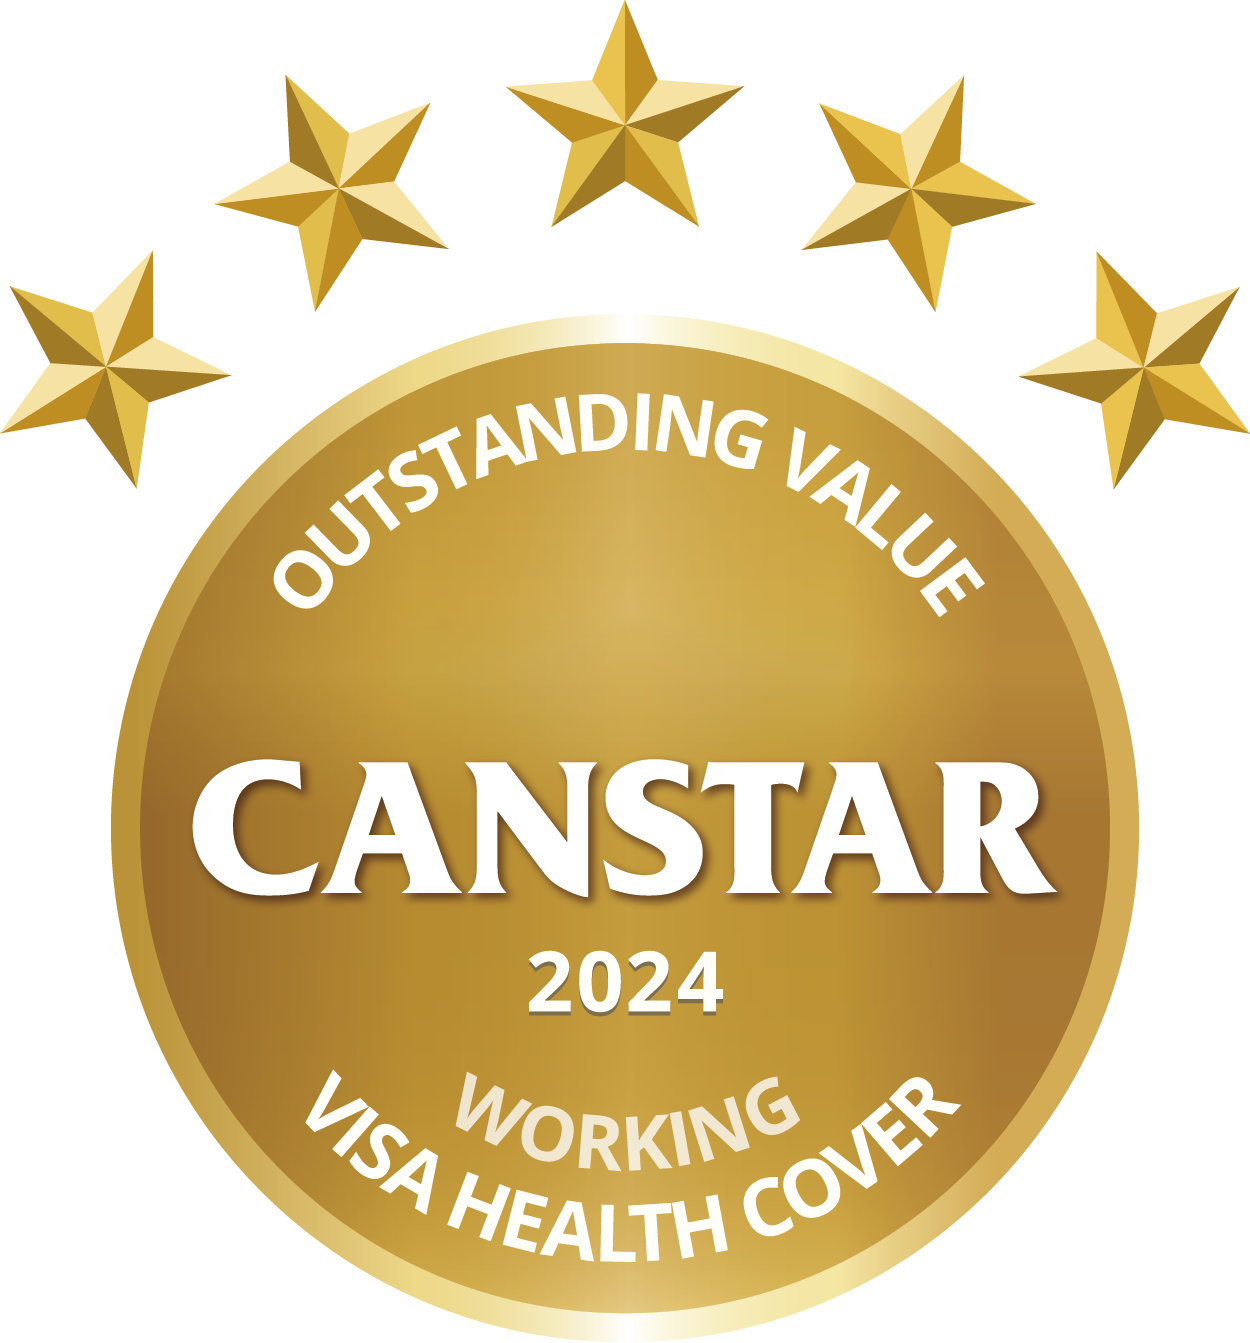 Outstanding value, Canstar 2024 Award for Working Visa Health Cover